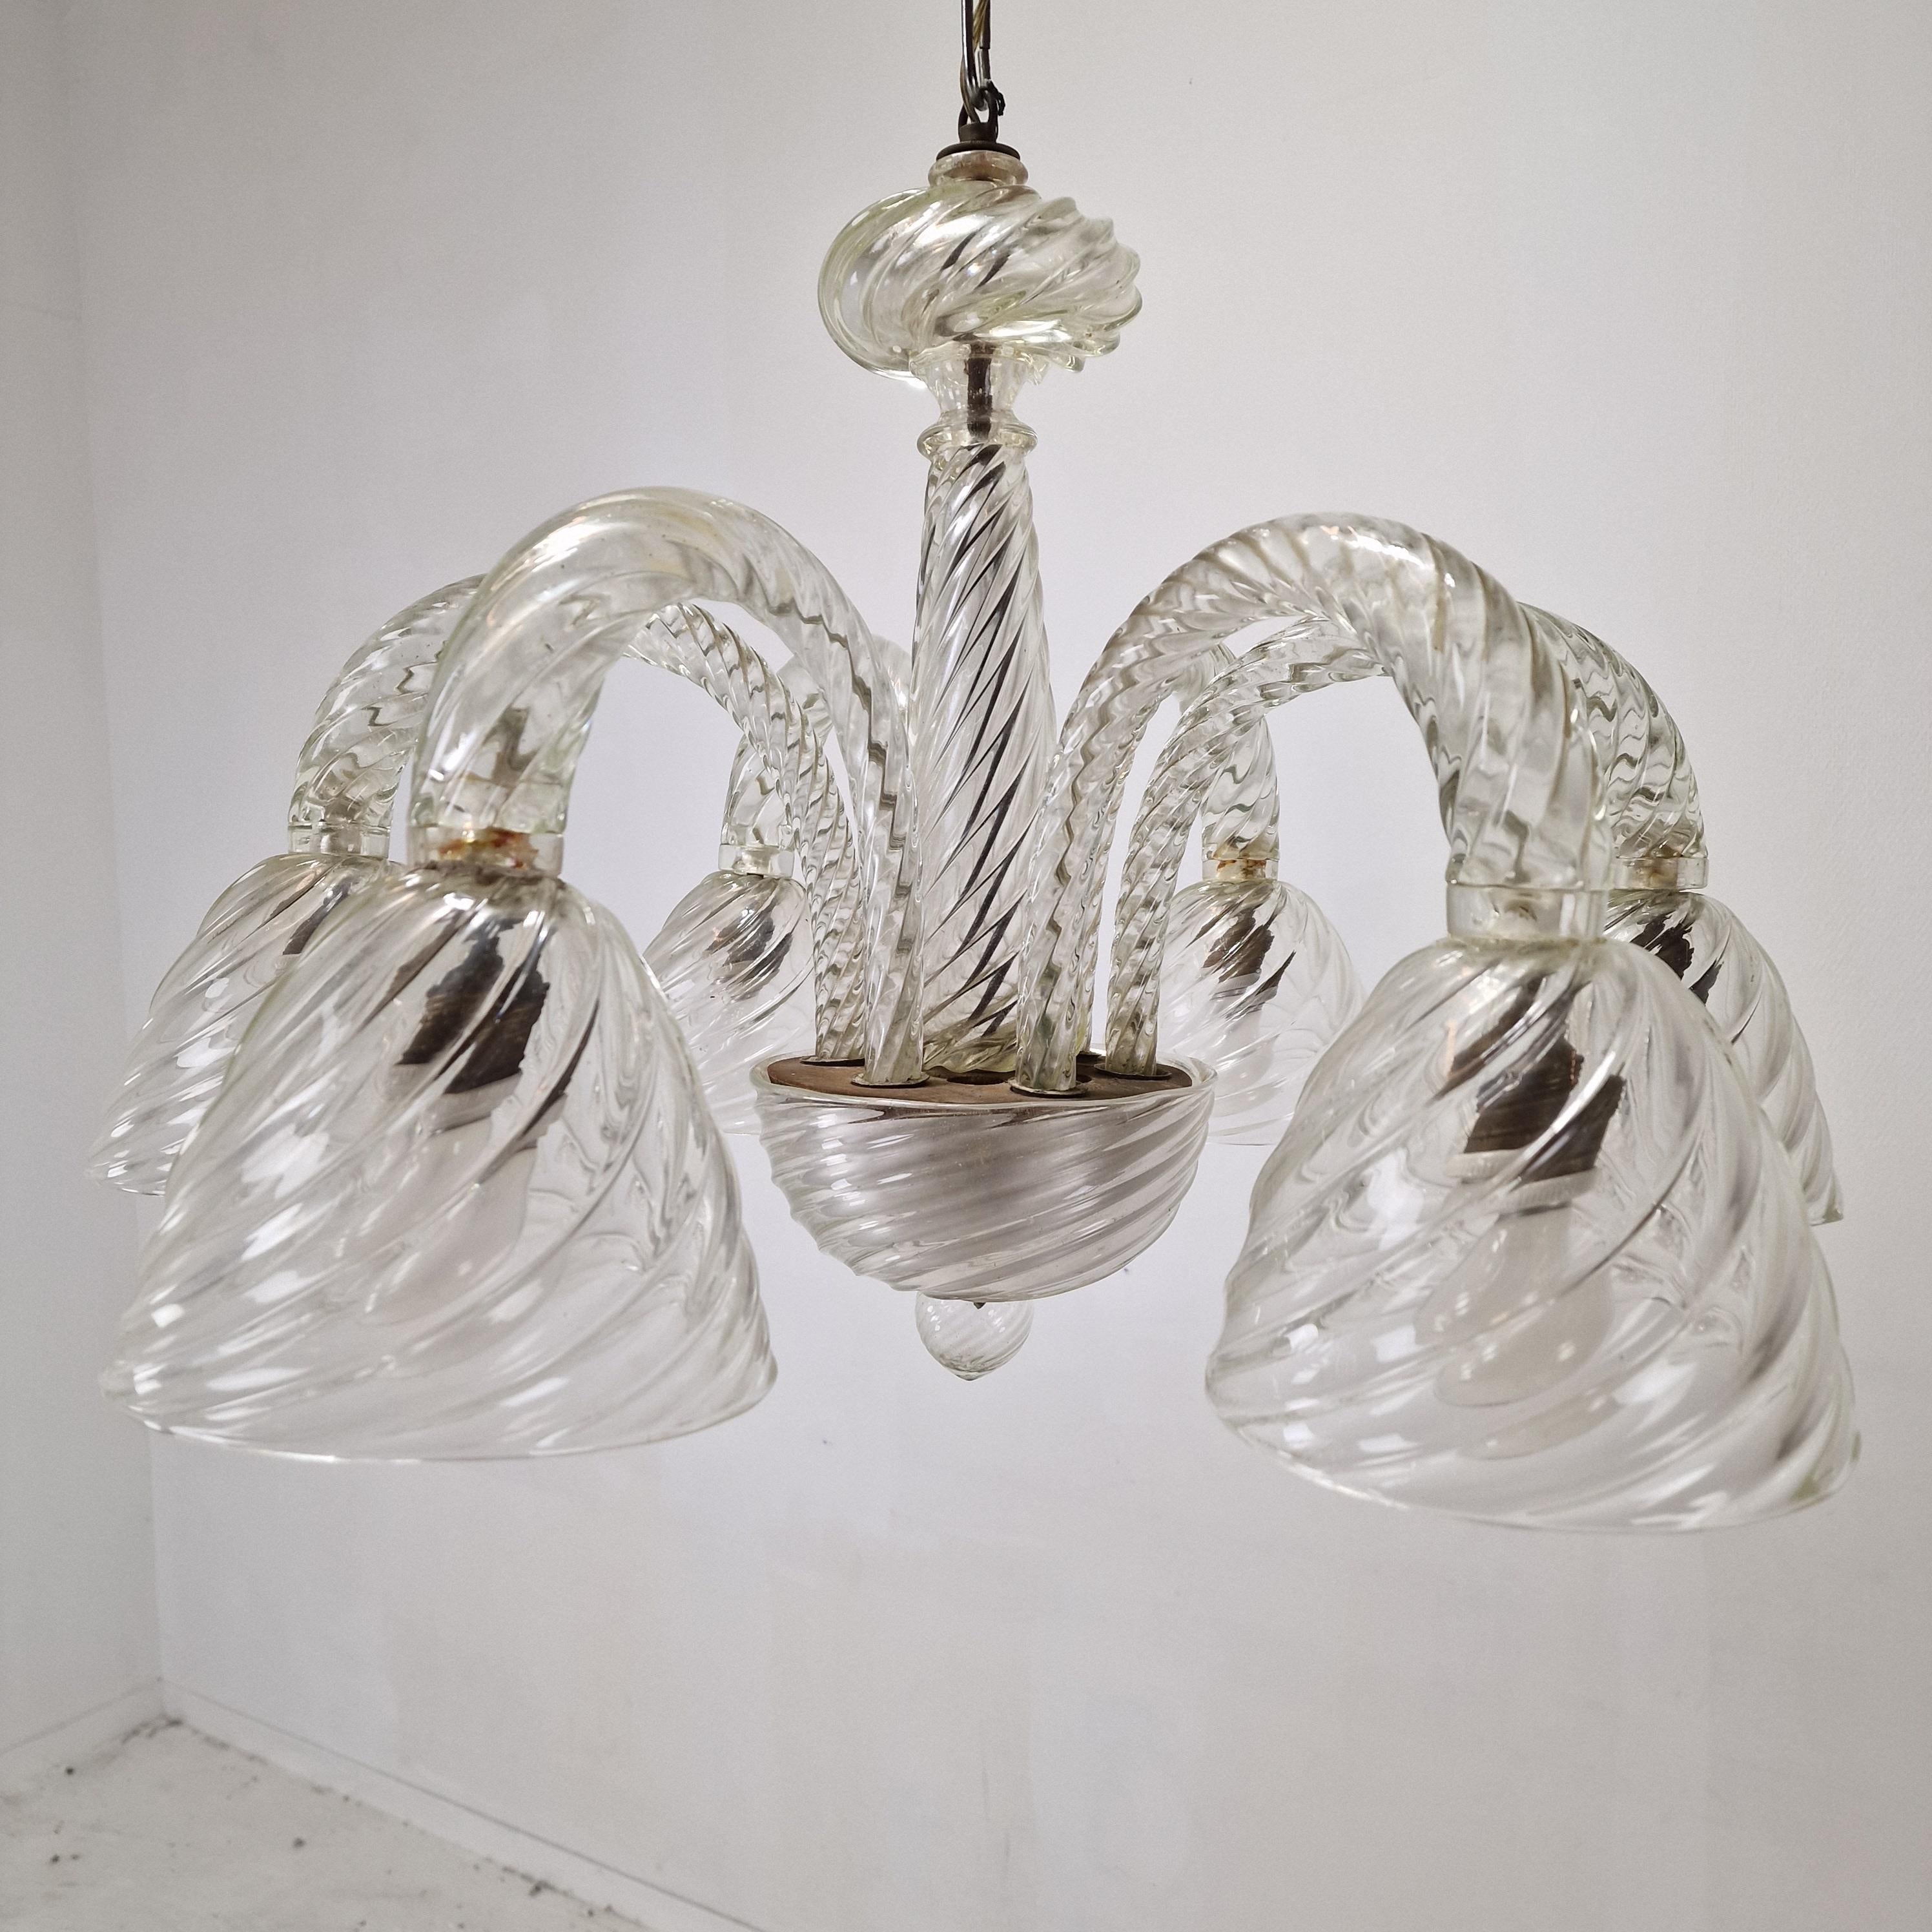 Barovier & Toso Murano Glass Chandelier, Italy 1950's For Sale 2